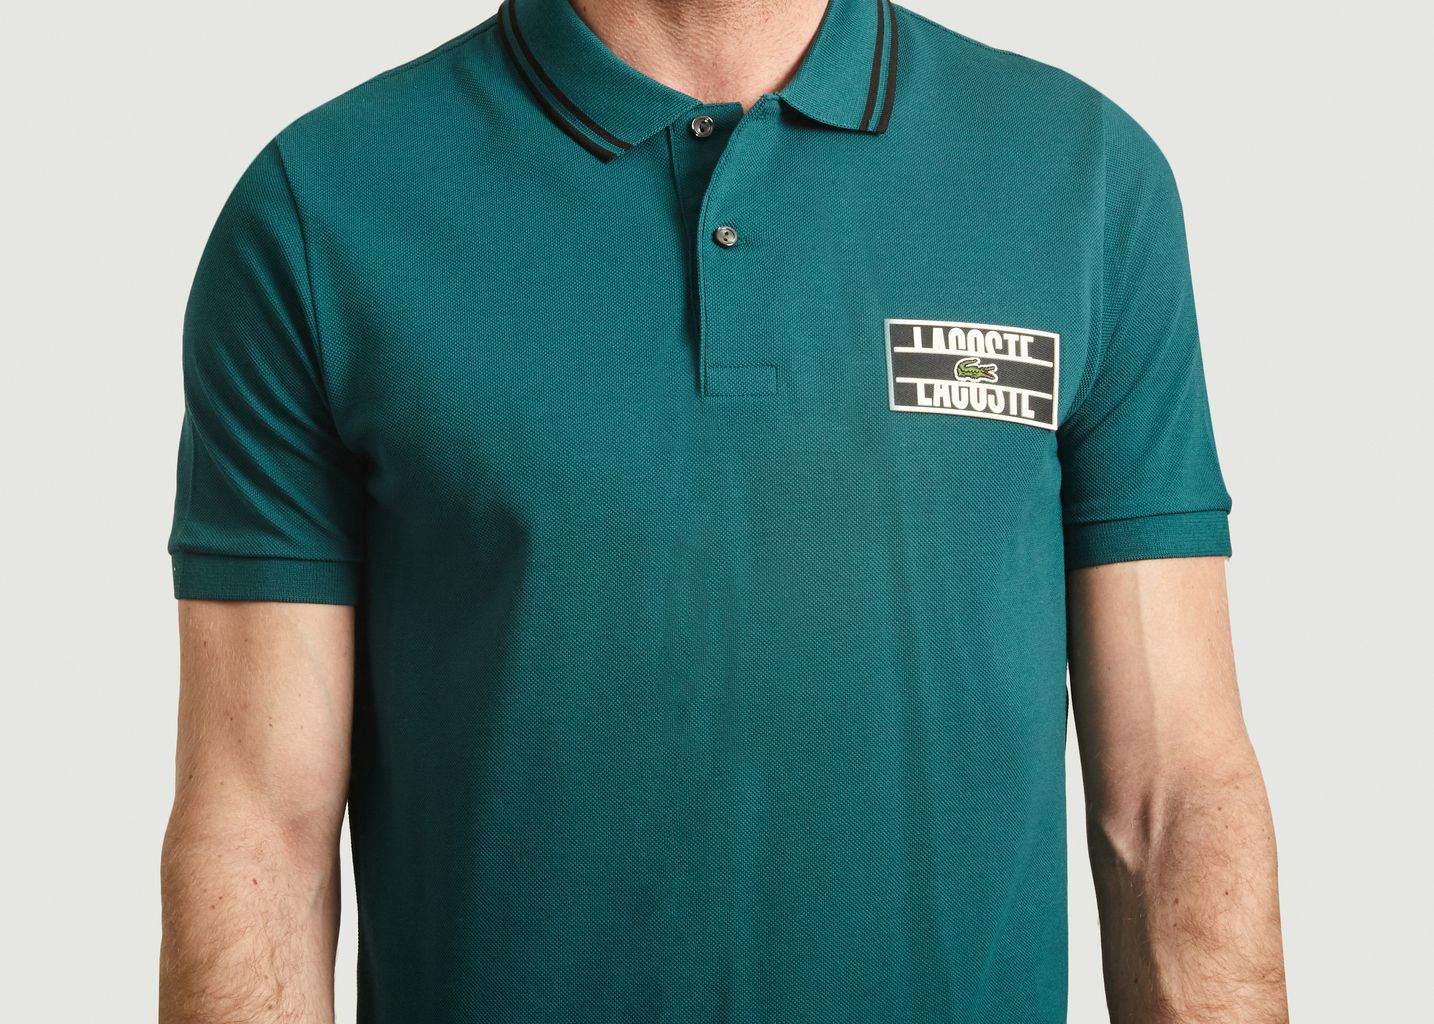 Polo shirt with logo patch and contrasting edge - Lacoste Live